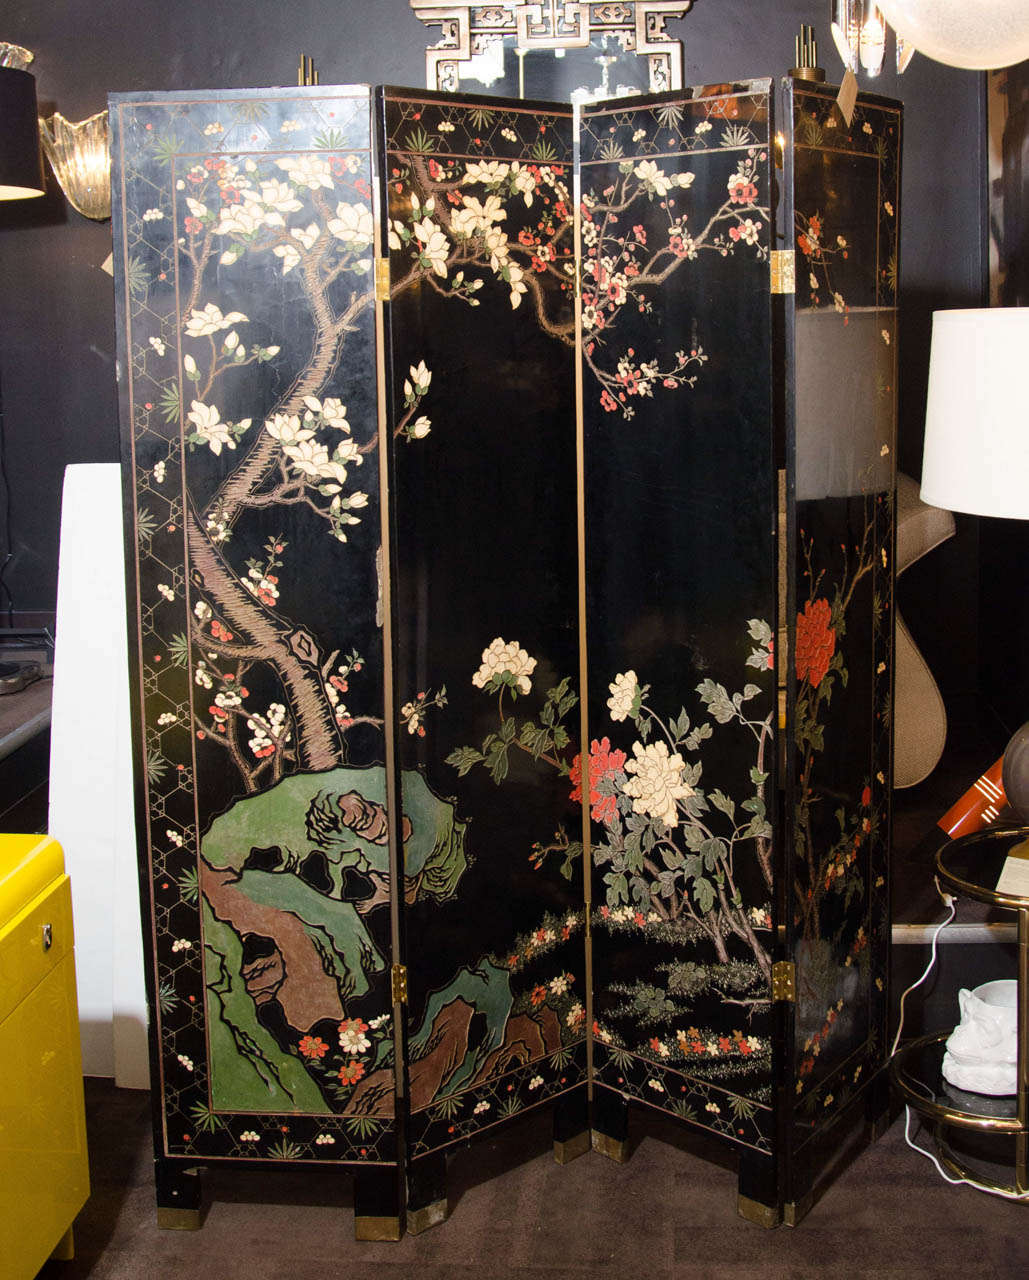 Exquisite four panel screen with hand carved designs and Japanese scenery on both sides of the screens. Hand painted and carved in vibrant hues of gold leaf, red, green, blue, and yellow over black lacquered background. Four panels - each panel is